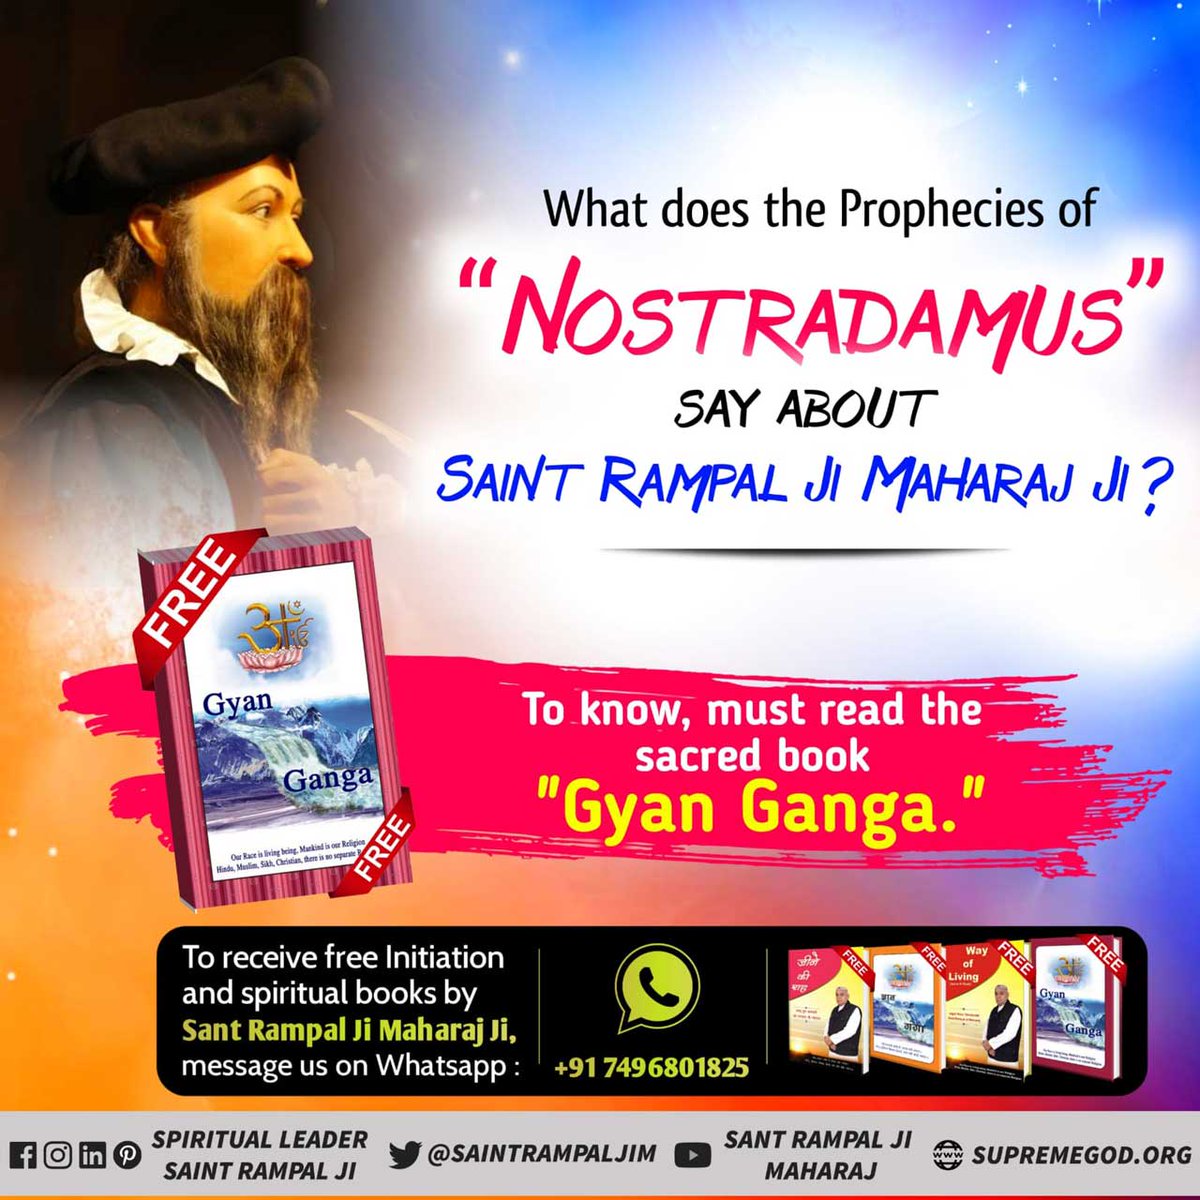 #GodNightWednesday
What does the Prophecies
'NOSTRADAMUS'
SAY ABOUT
SAINT RAMPAL JI MAHARAJ JI ?
To know more must read the previous book 'Gyan Ganga''
Visit Saint Rampal Ji Maharaj YouTube Channel
#WednesdayMotivation